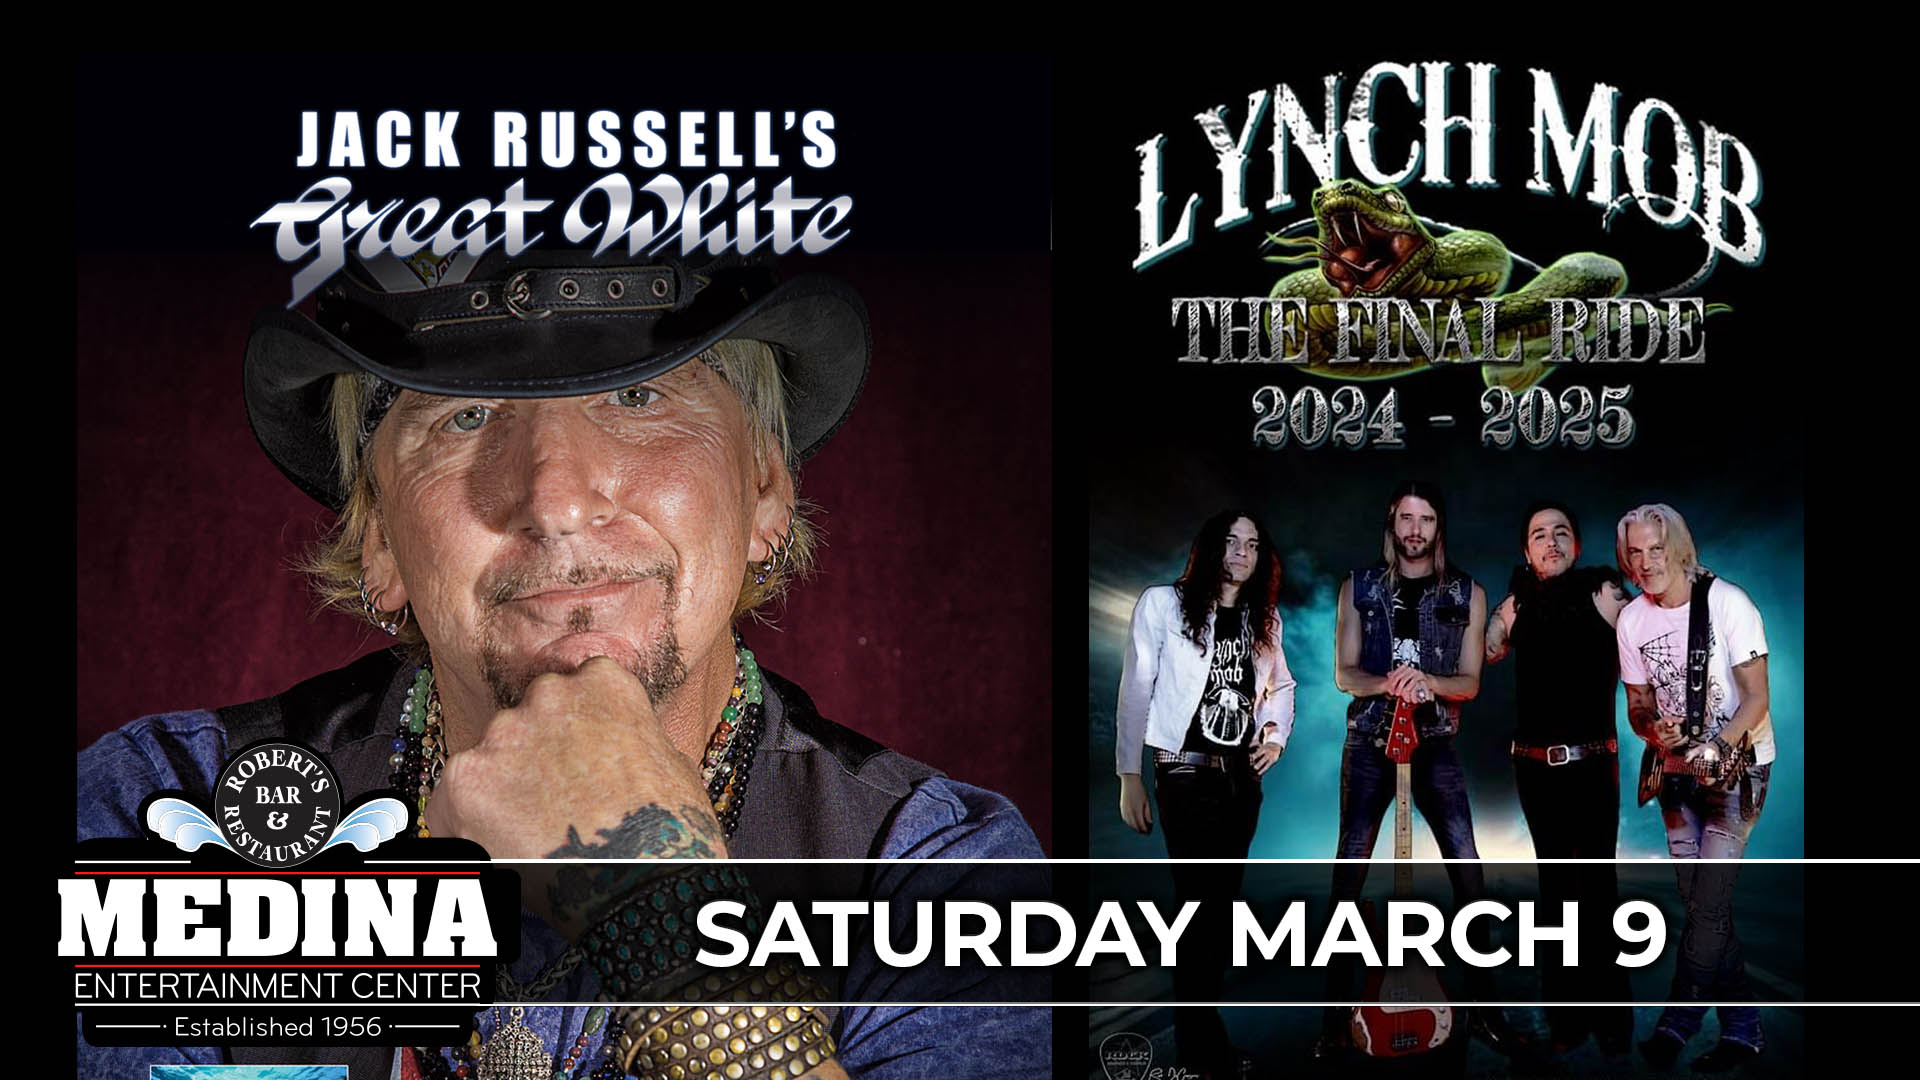 Jack Russell’s GREAT WHITE and LYNCH MOB The Final Ride Medina Entertainment Center Saturday, March 9th, 2024 Doors: 7:00PM | Music: 8:00PM | 21+ Tickets on-sale Friday, January 5 at 11AM General Seating $36 / Silver Reserved $44 / Gold Reserved $49 plus applicable fees